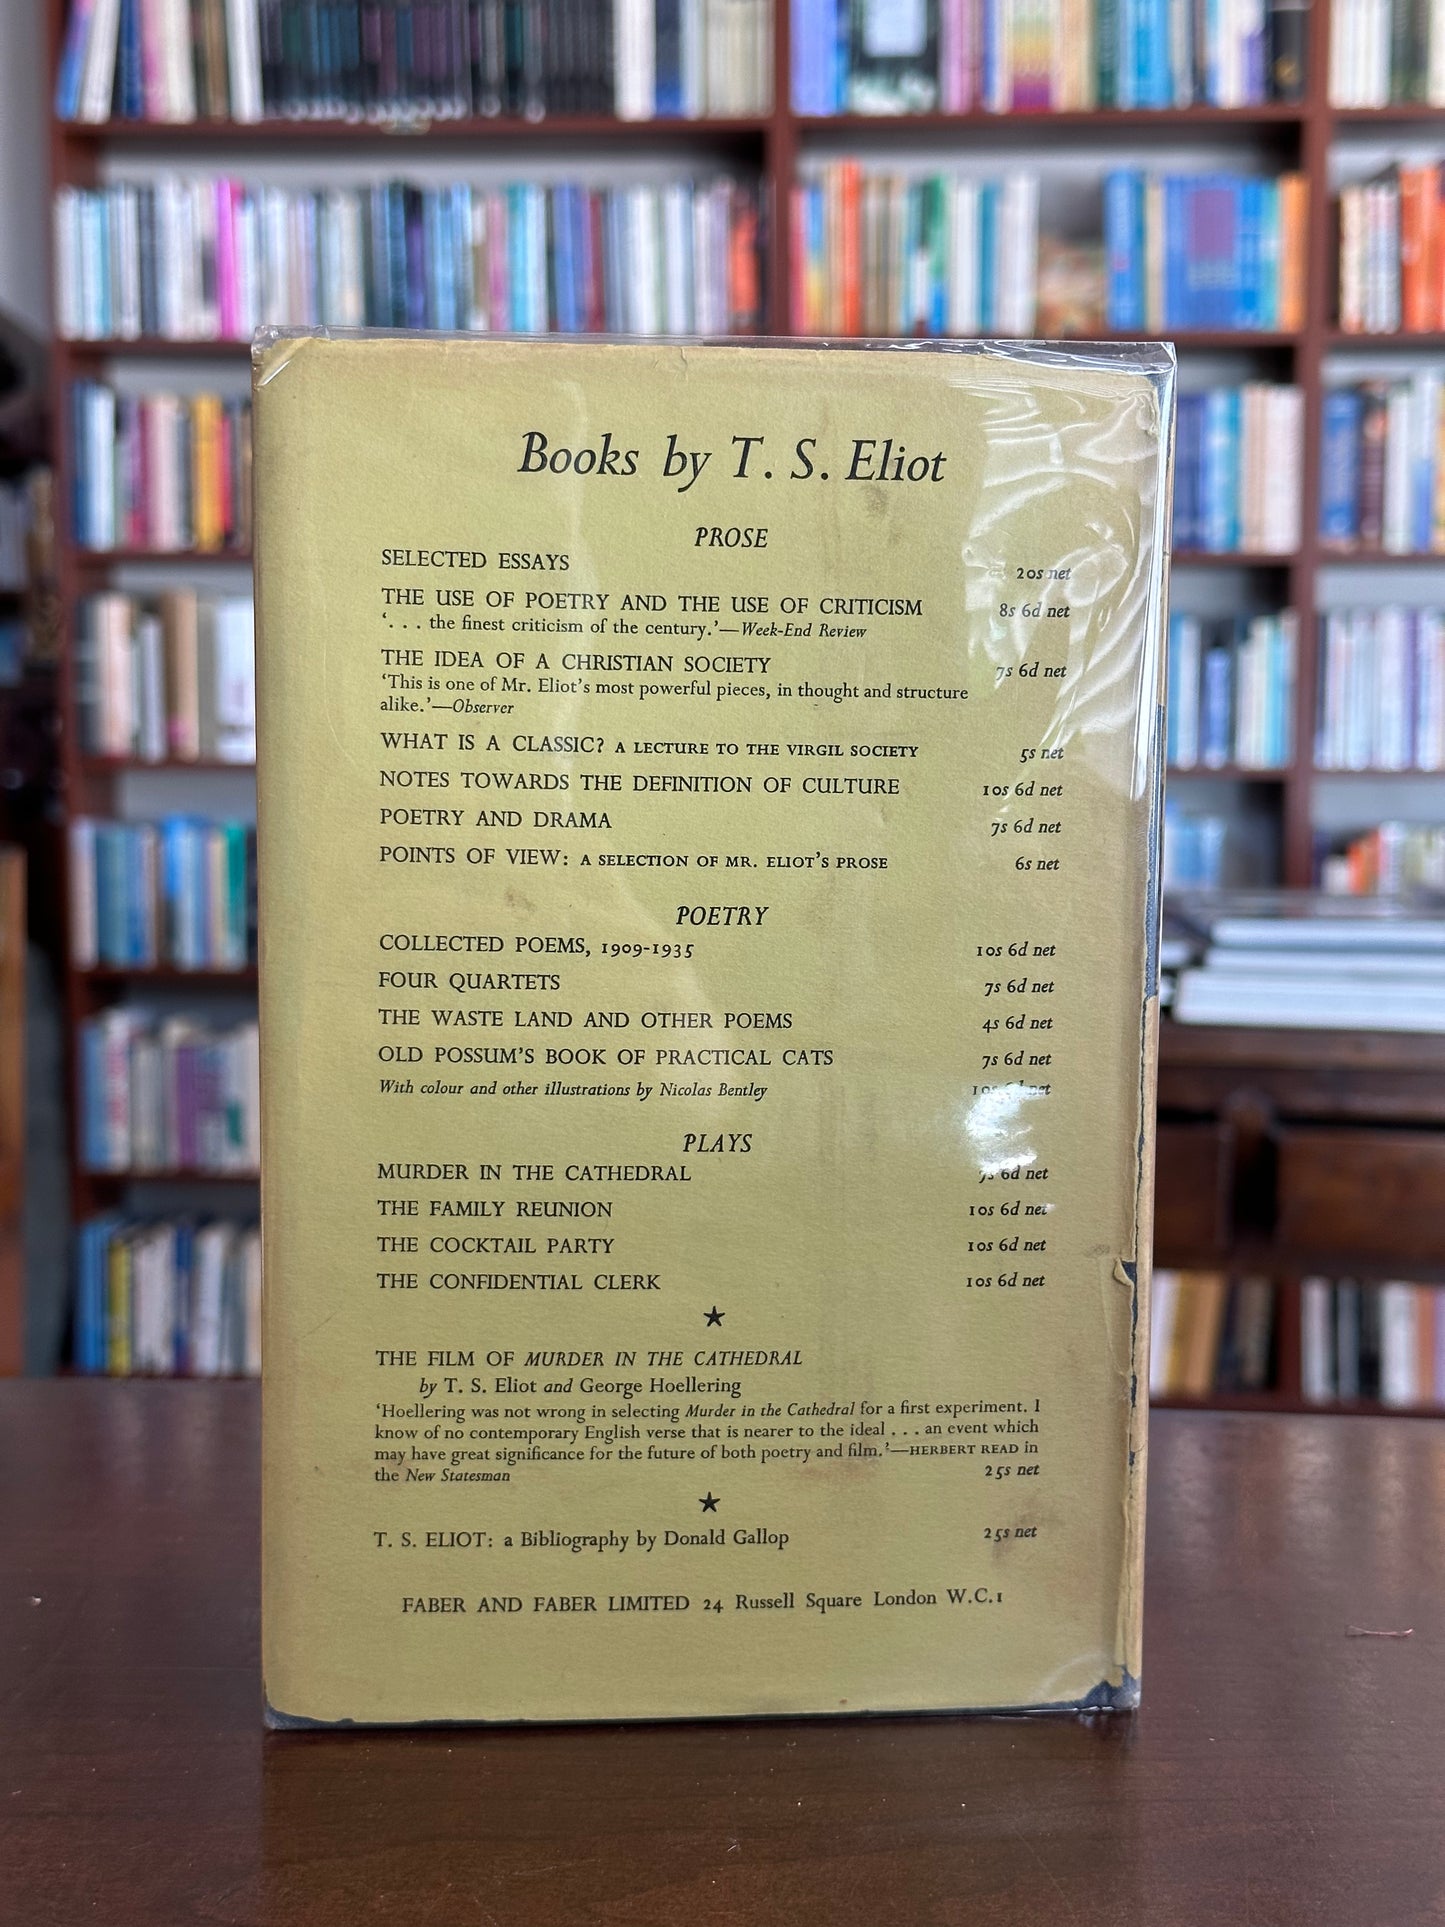 The Confidential Clerk by T.S. Eliot (First Edition)